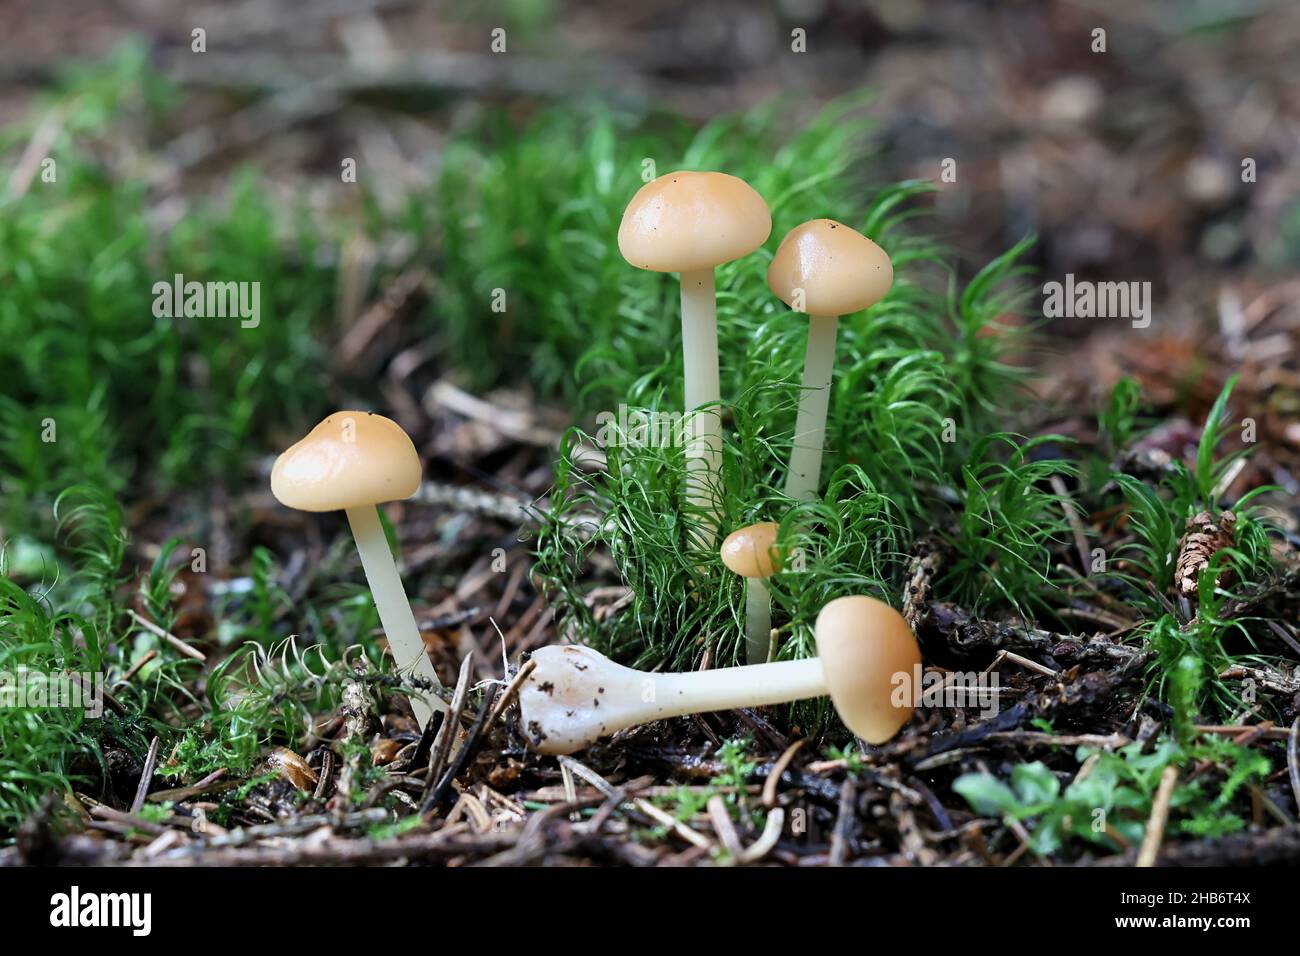 Gymnopus aquosus, also called Collybia aquosa, commonly known as watery toughshank, wild mushroom from Finland Stock Photo